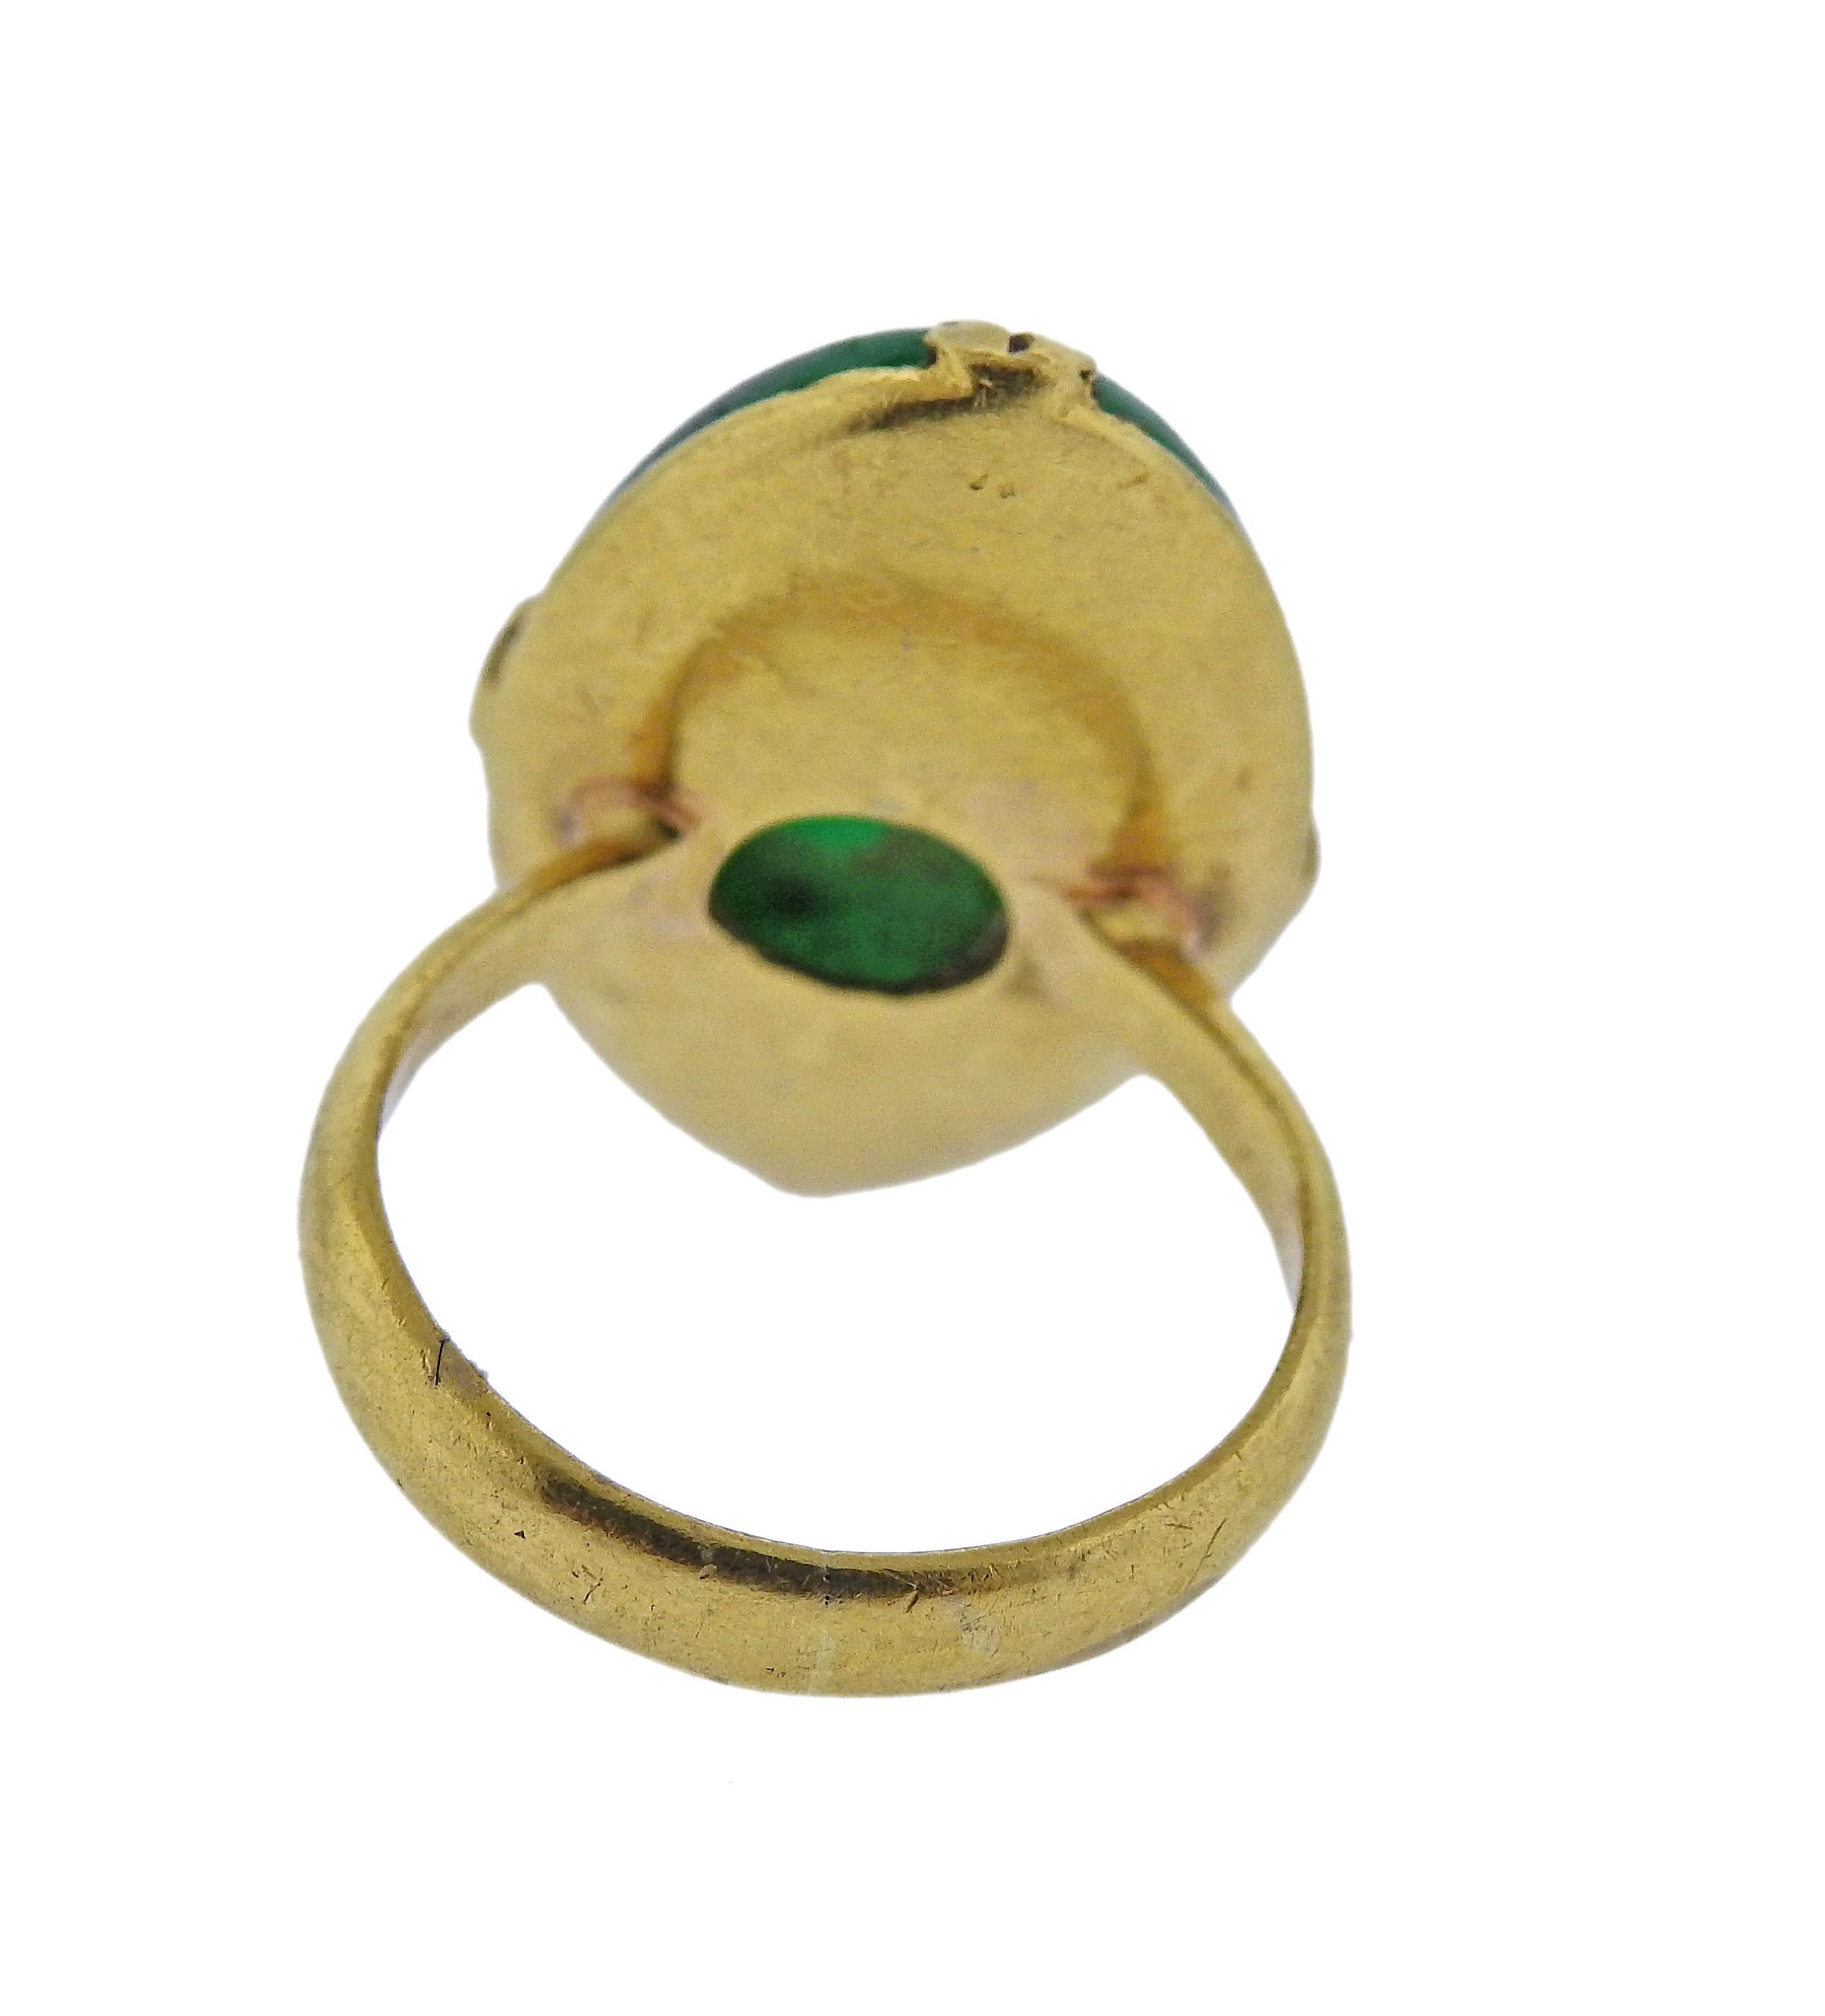 18k gold ring, with center jadeite jade gemstone. Ring size - 3.75, ring top - 22mm x 14mm. Weight - 6 grams. 